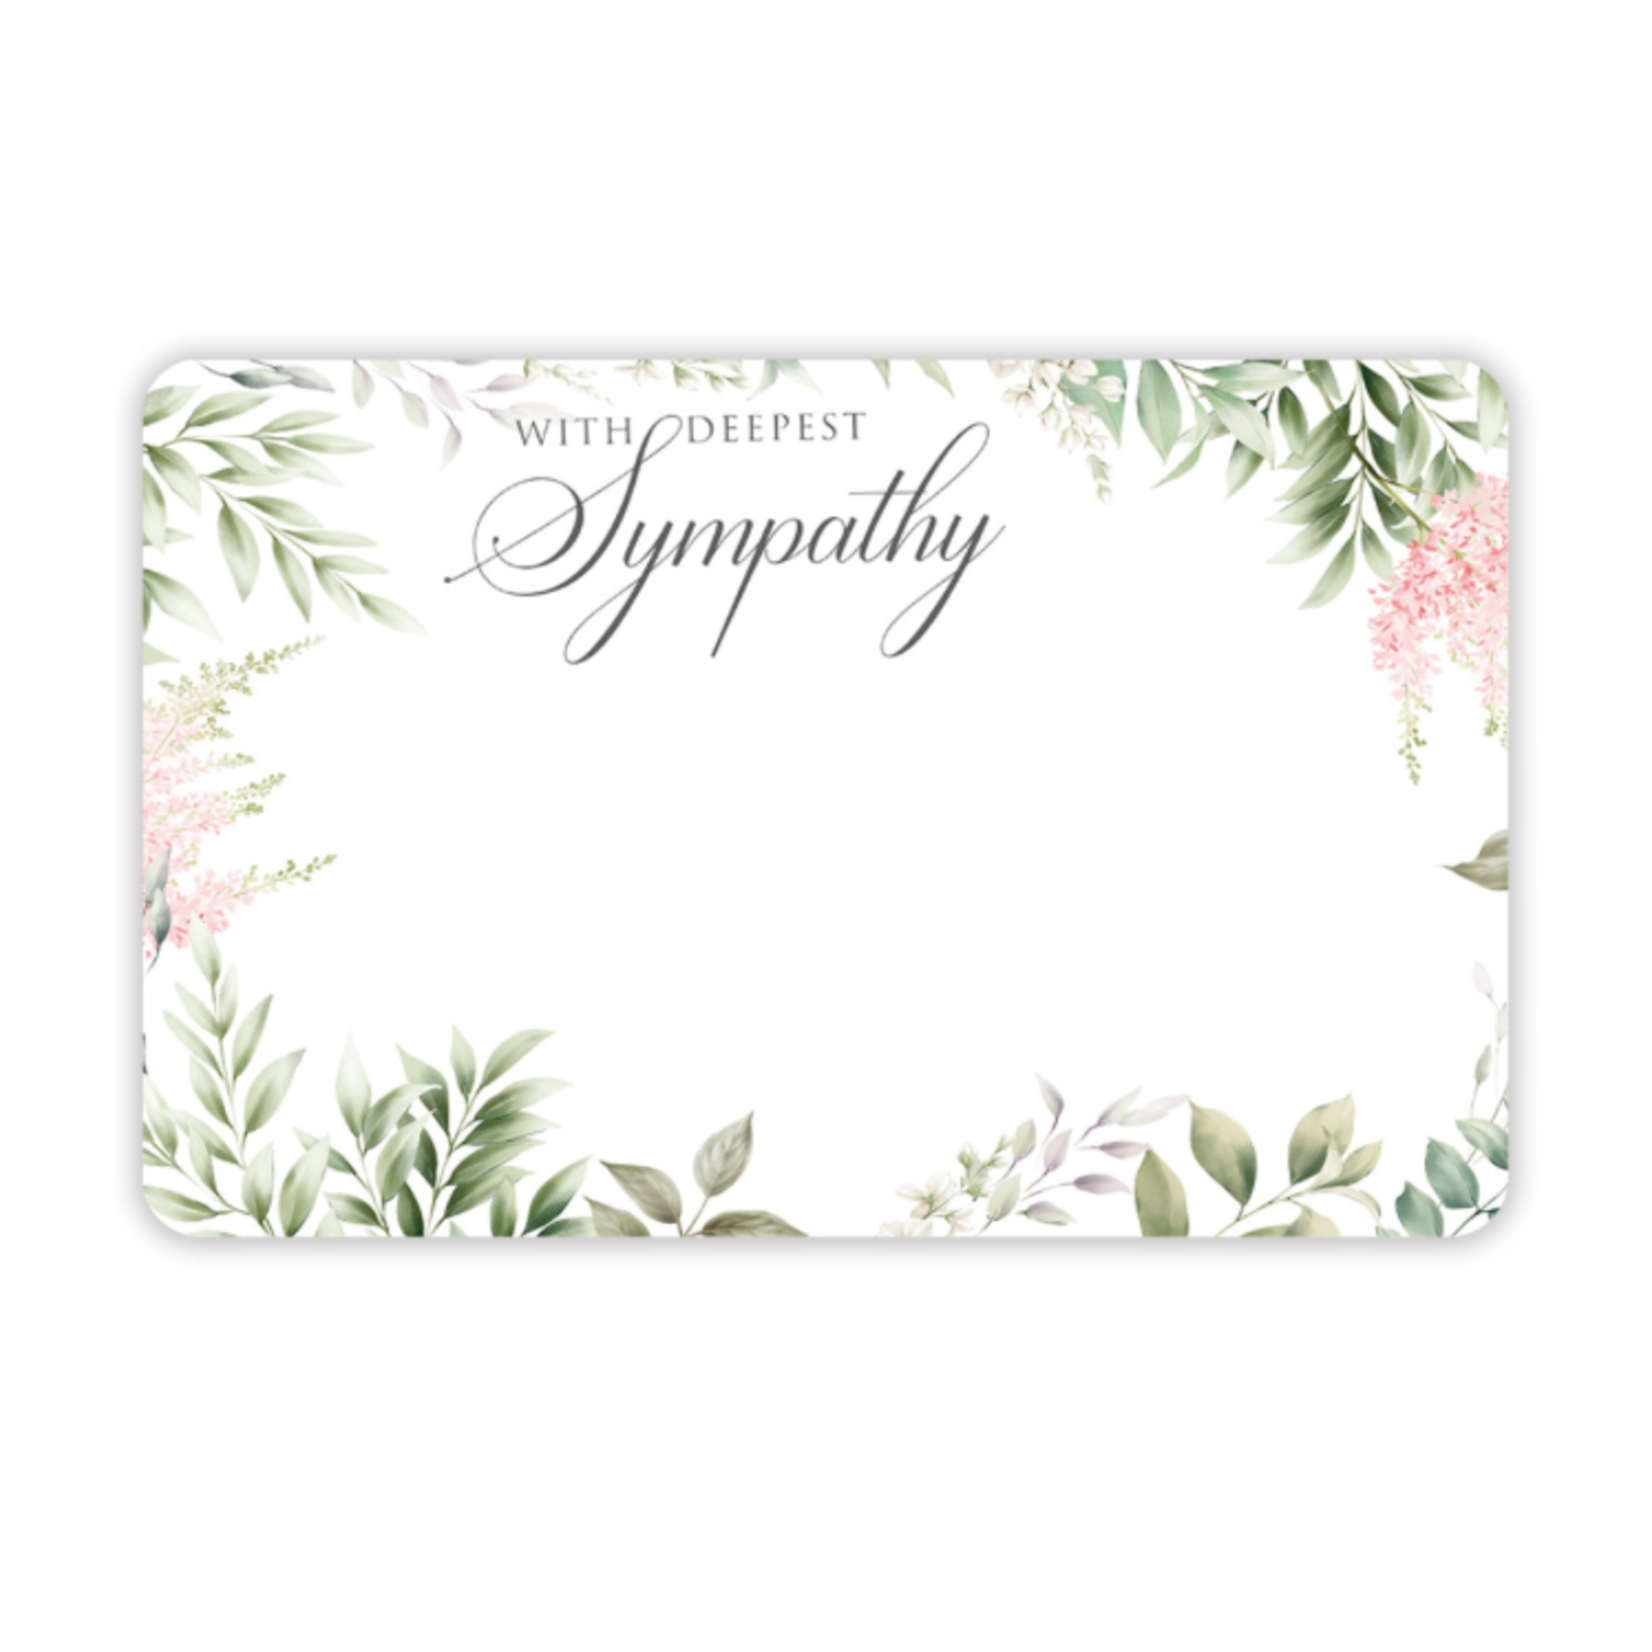 "WITH DEEPEST SYMPATHY" CAPRI CARDS